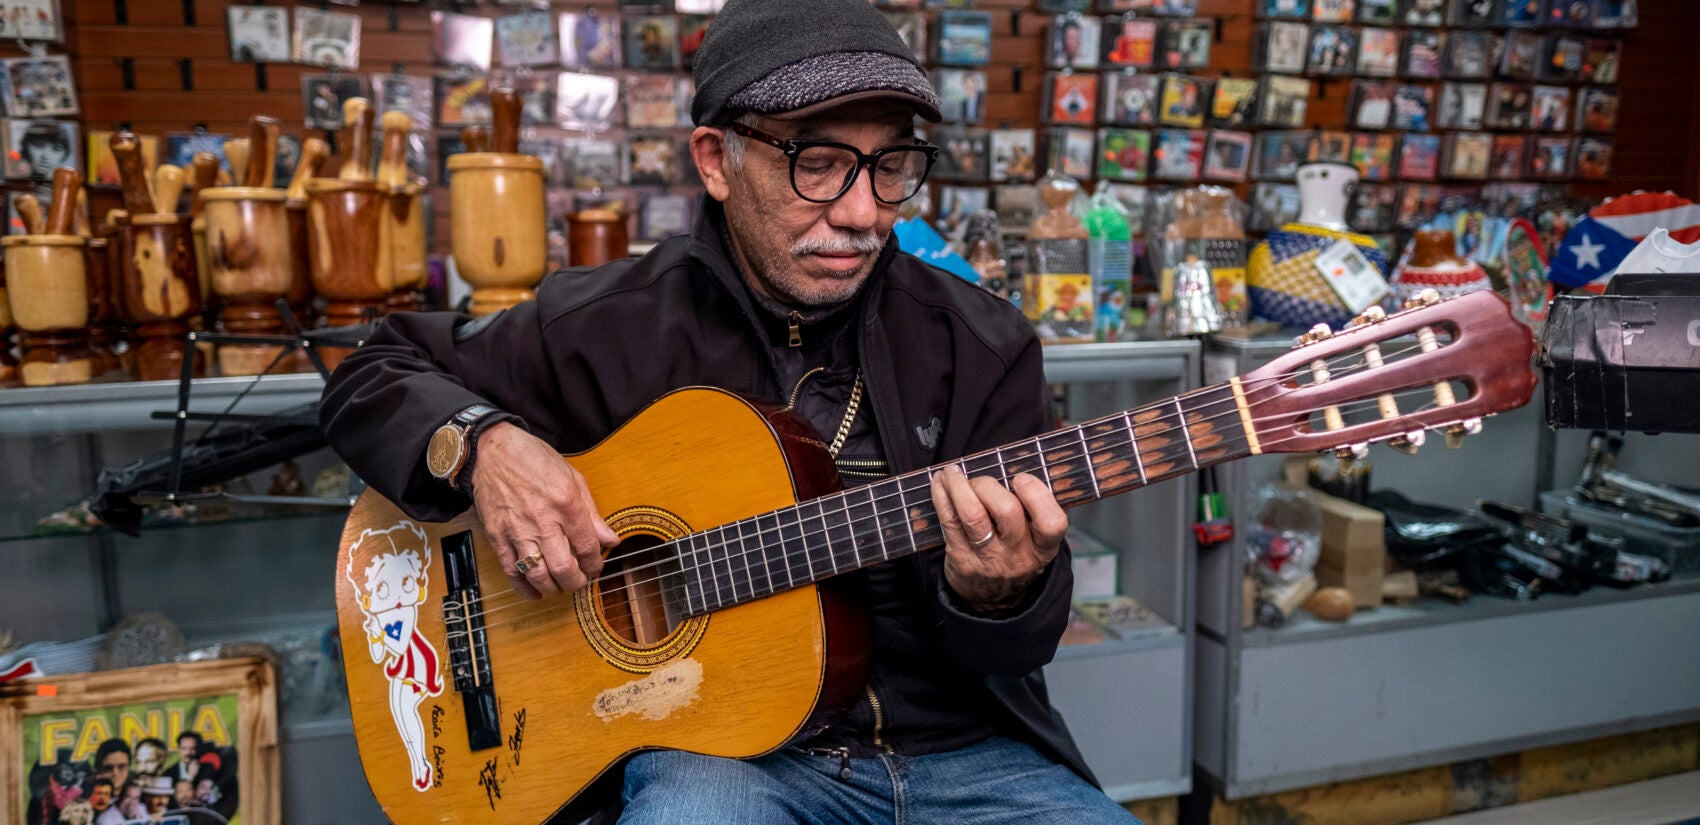 Friend and regular, Johnny Cruz playing the guitar at Centro Musical. His guitar features Betty Boop wearing the Puerto Rican flag. | Amigo y habitual, Johnny Cruz tocando la guitarra en Centro Músical. Su guitarra presenta a Betty Boop con la bandera de Puerto Rico.